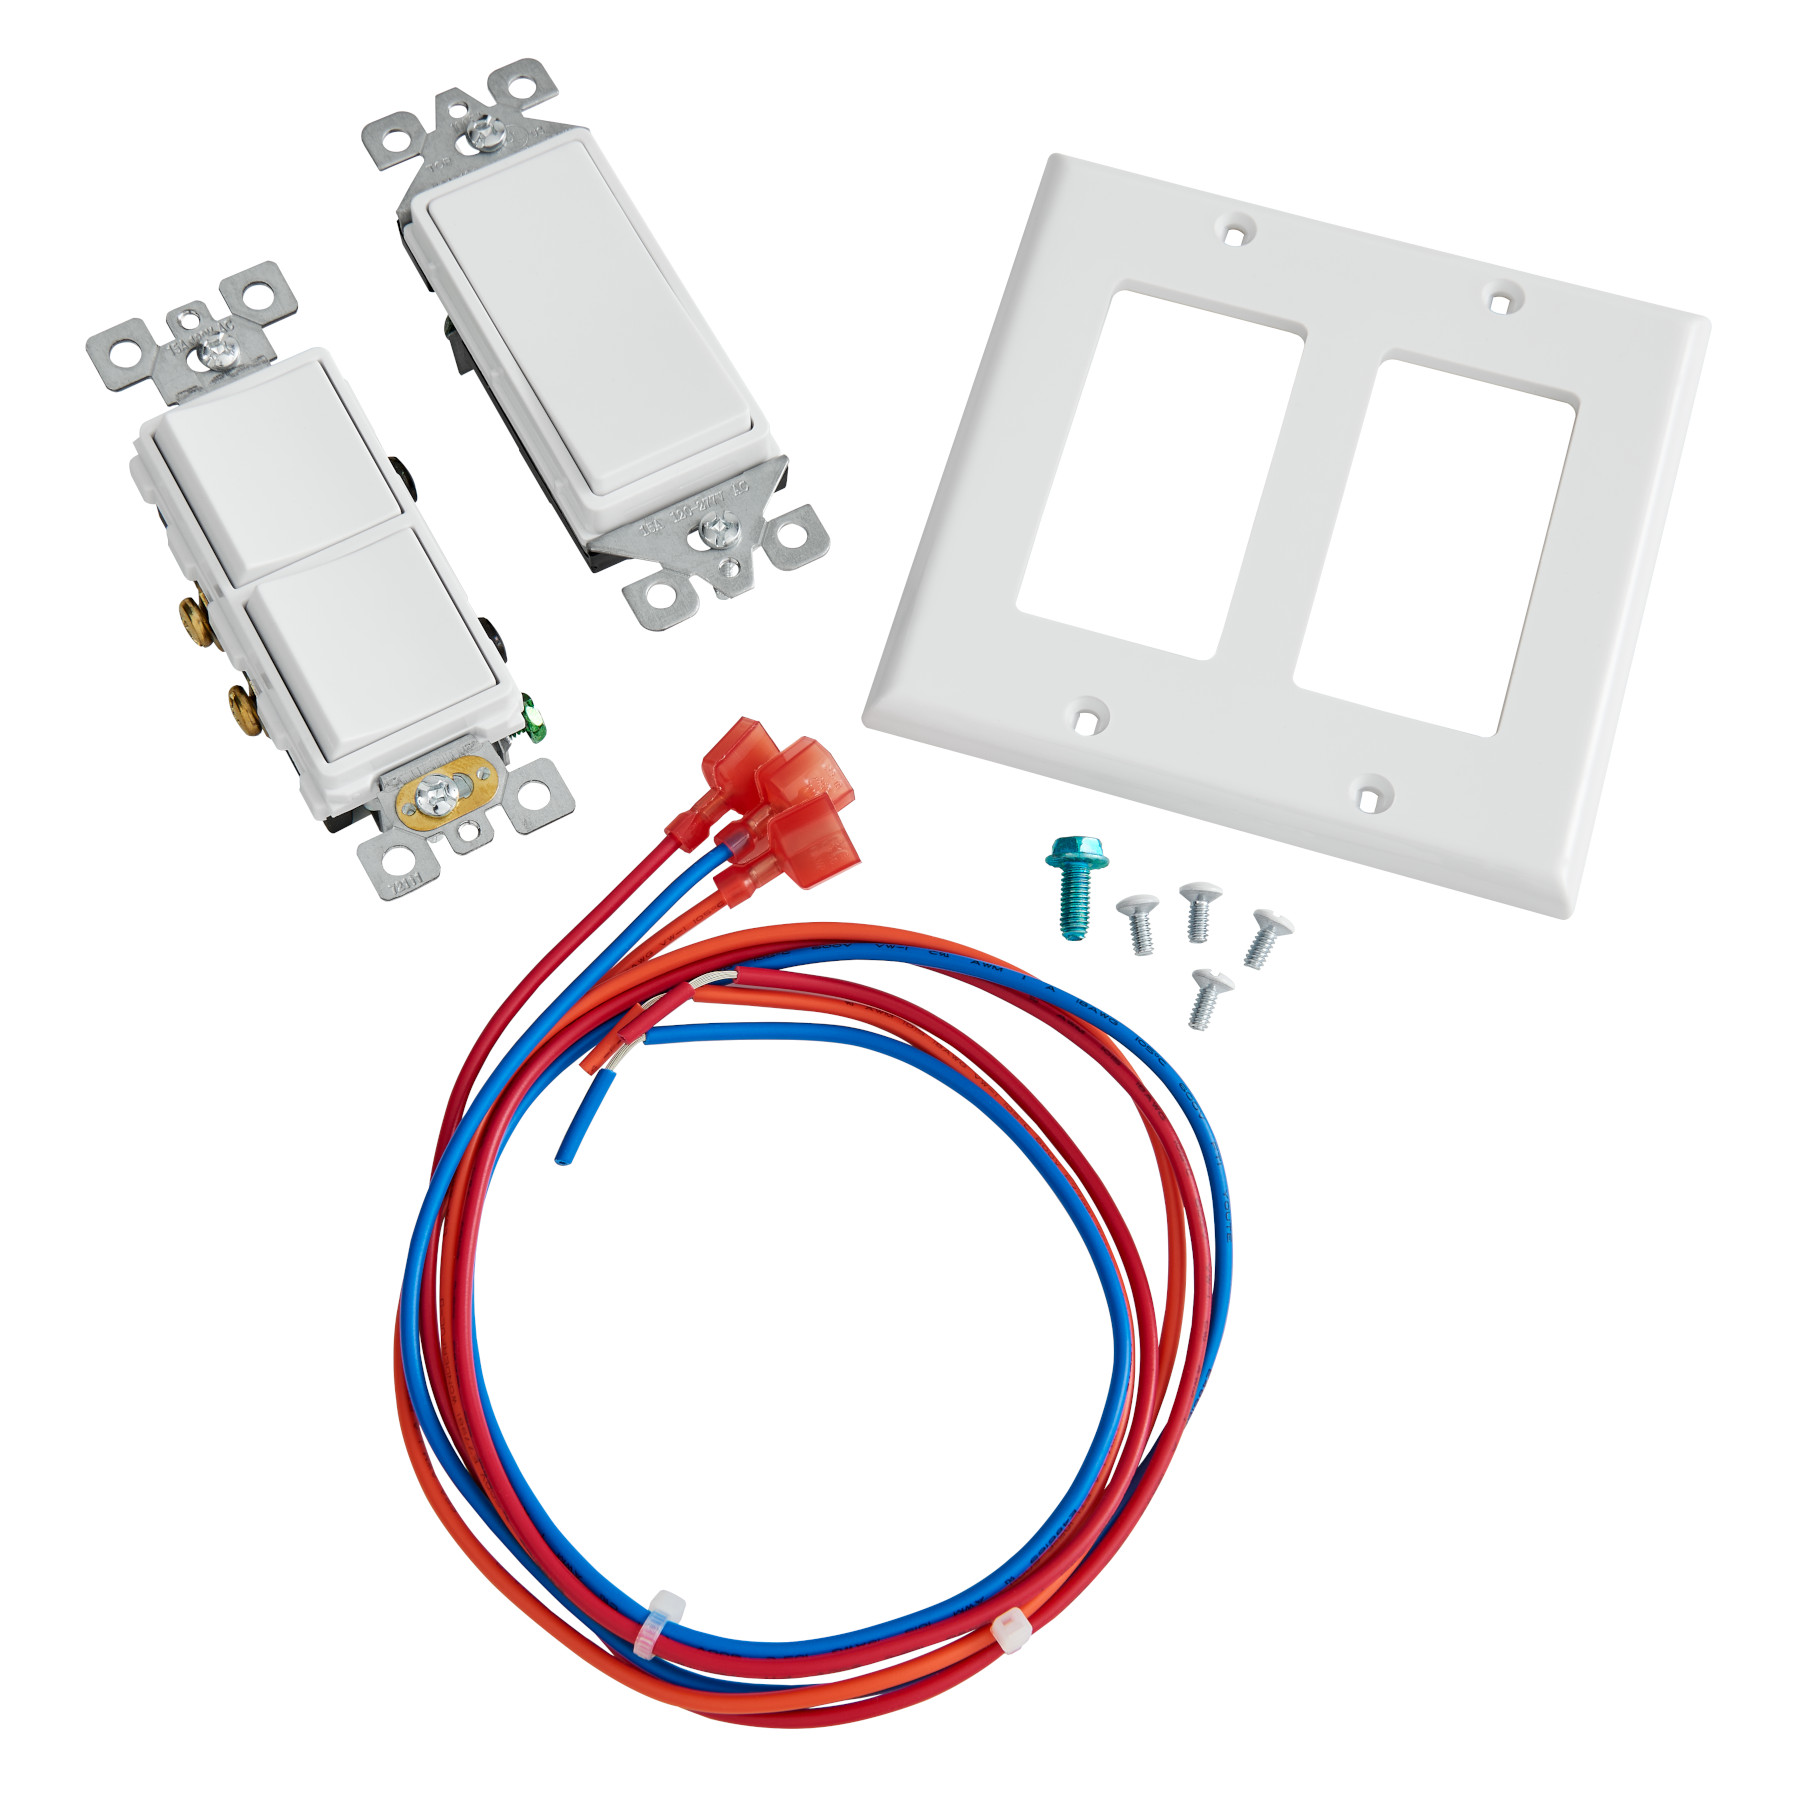 High voltage wiring kit for ADA application